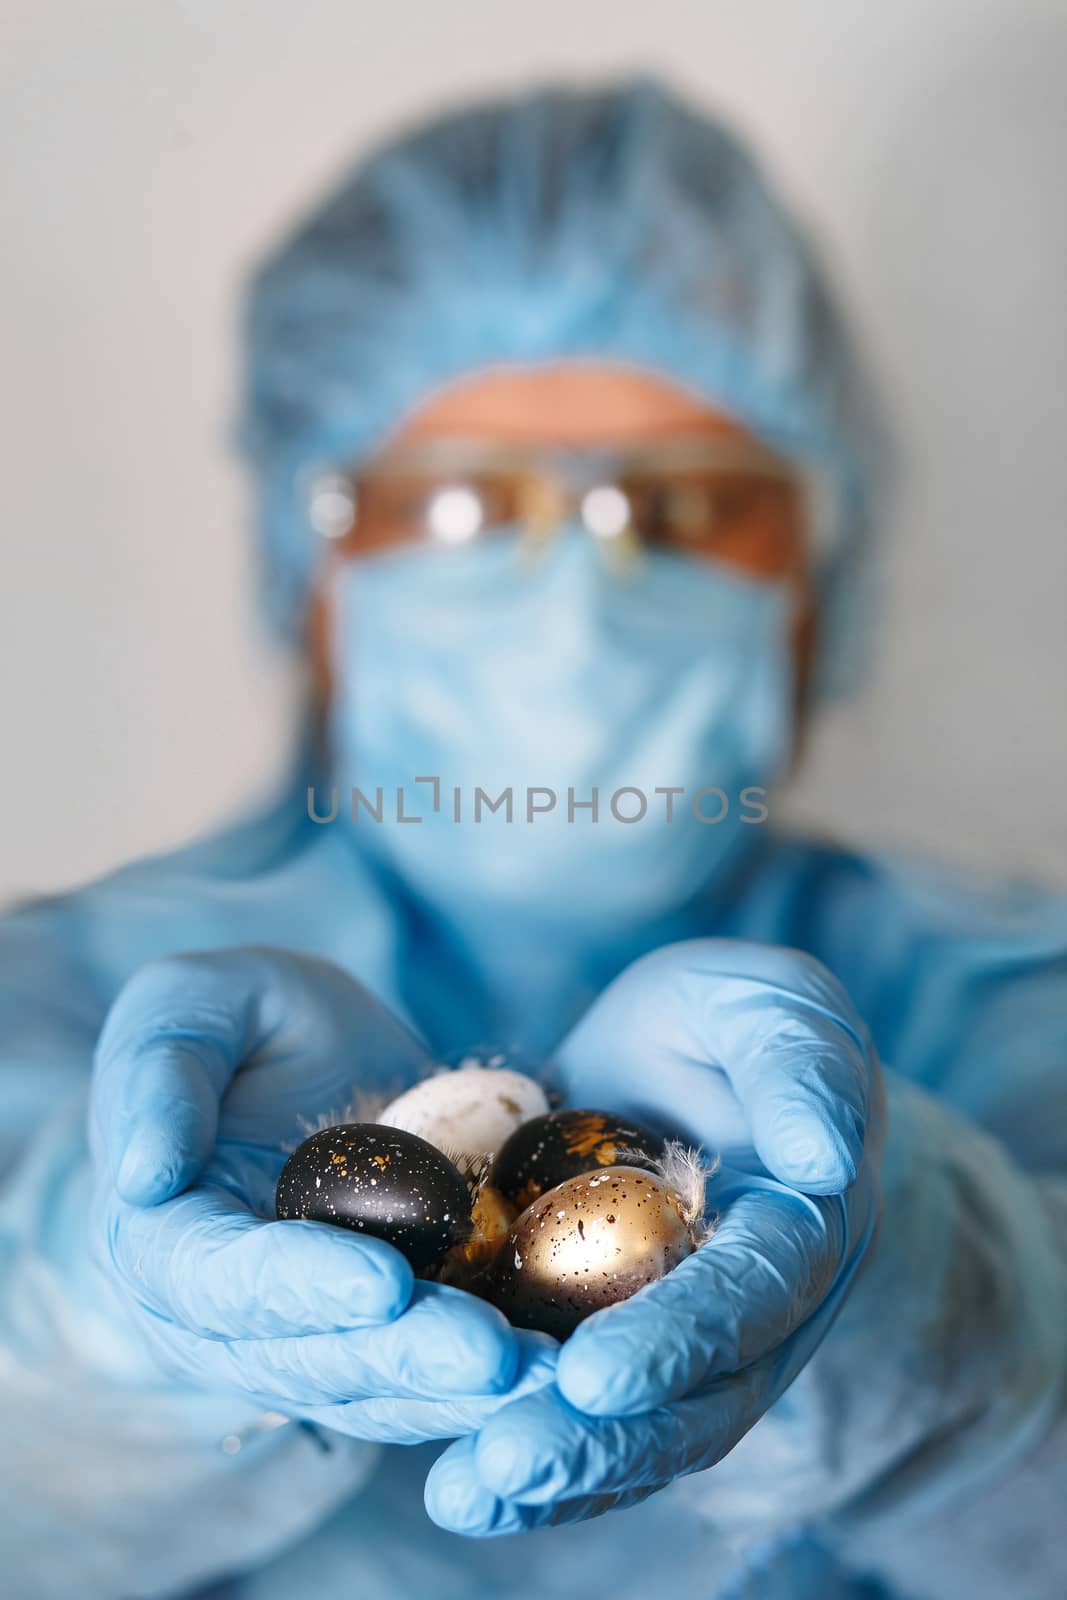 Hands in medical gloves holding modern painted easter eggs. Selective focus. Toned picture.